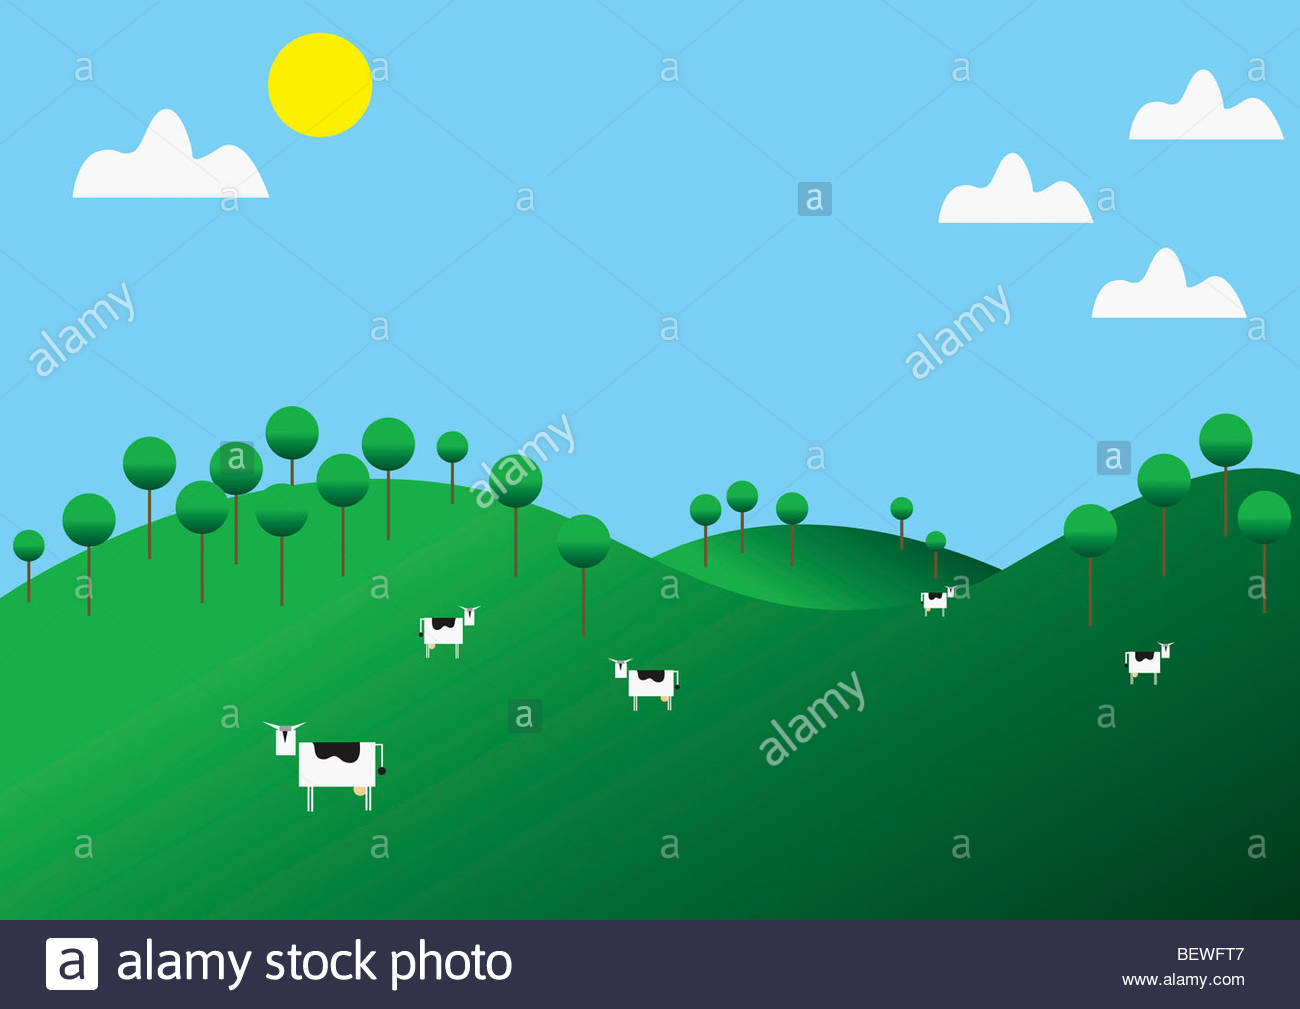 cows-grazing-in-country-field-BEWFT7.jpg